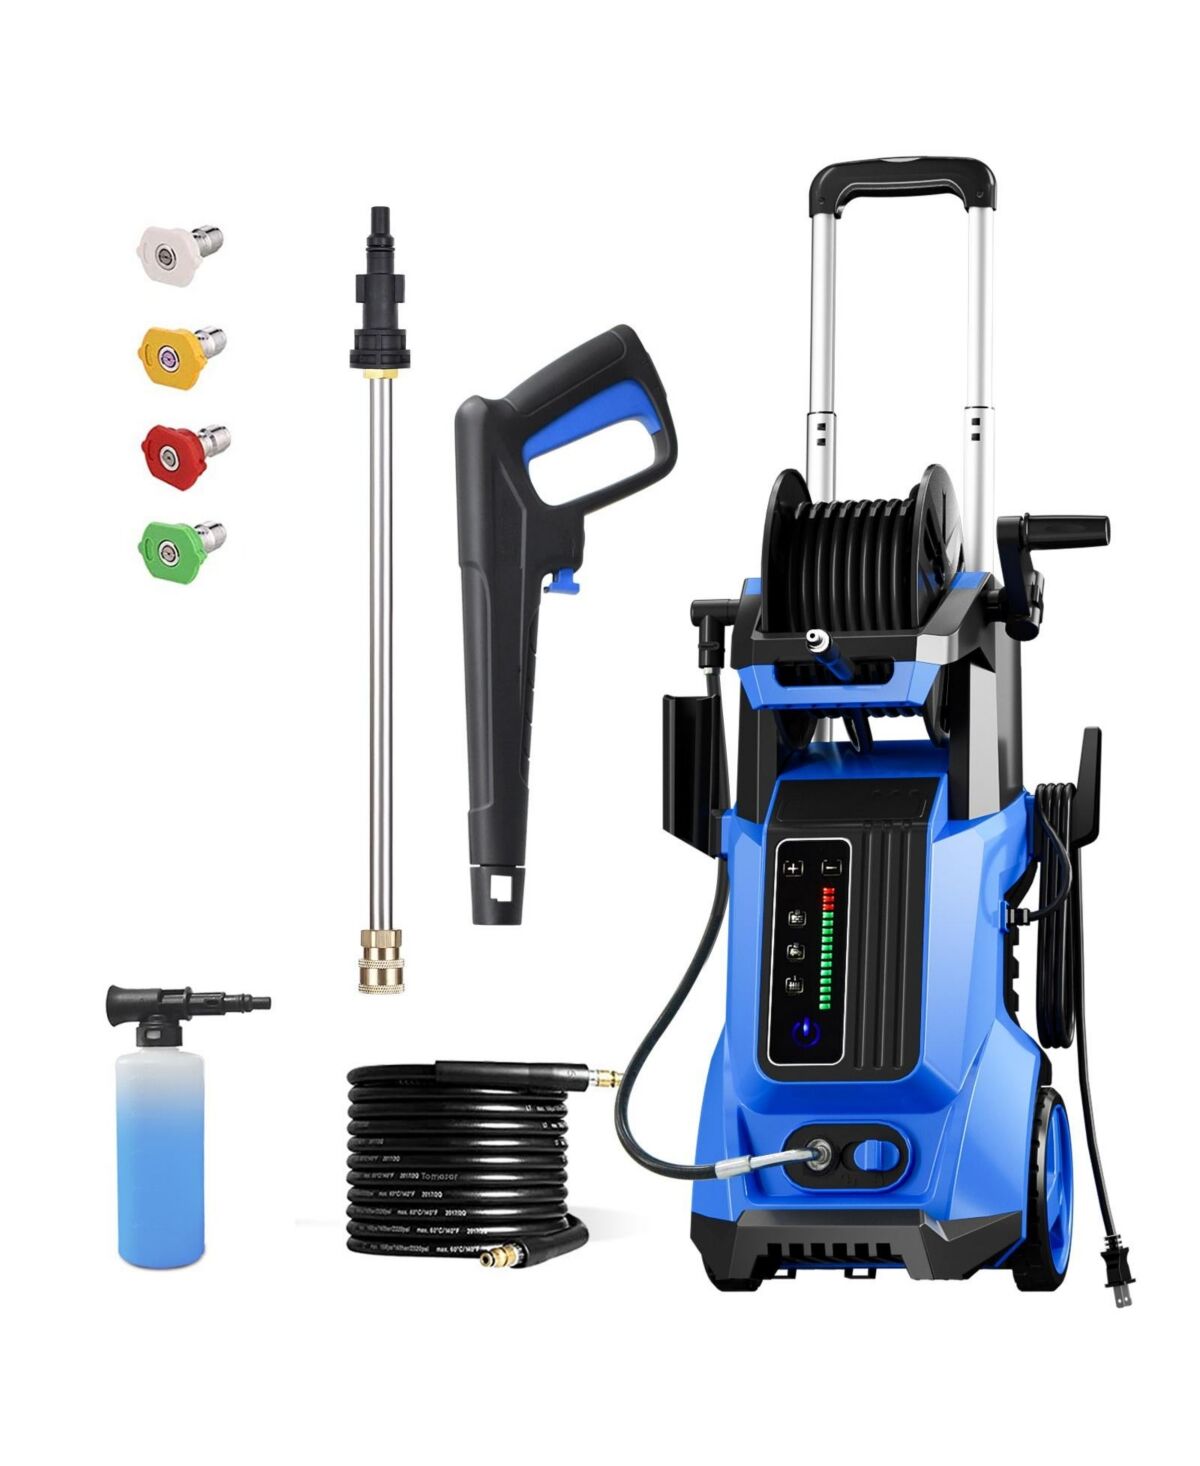 Sugift Electric Pressure Washer with Touch Screen Adjustable Pressure - Blue